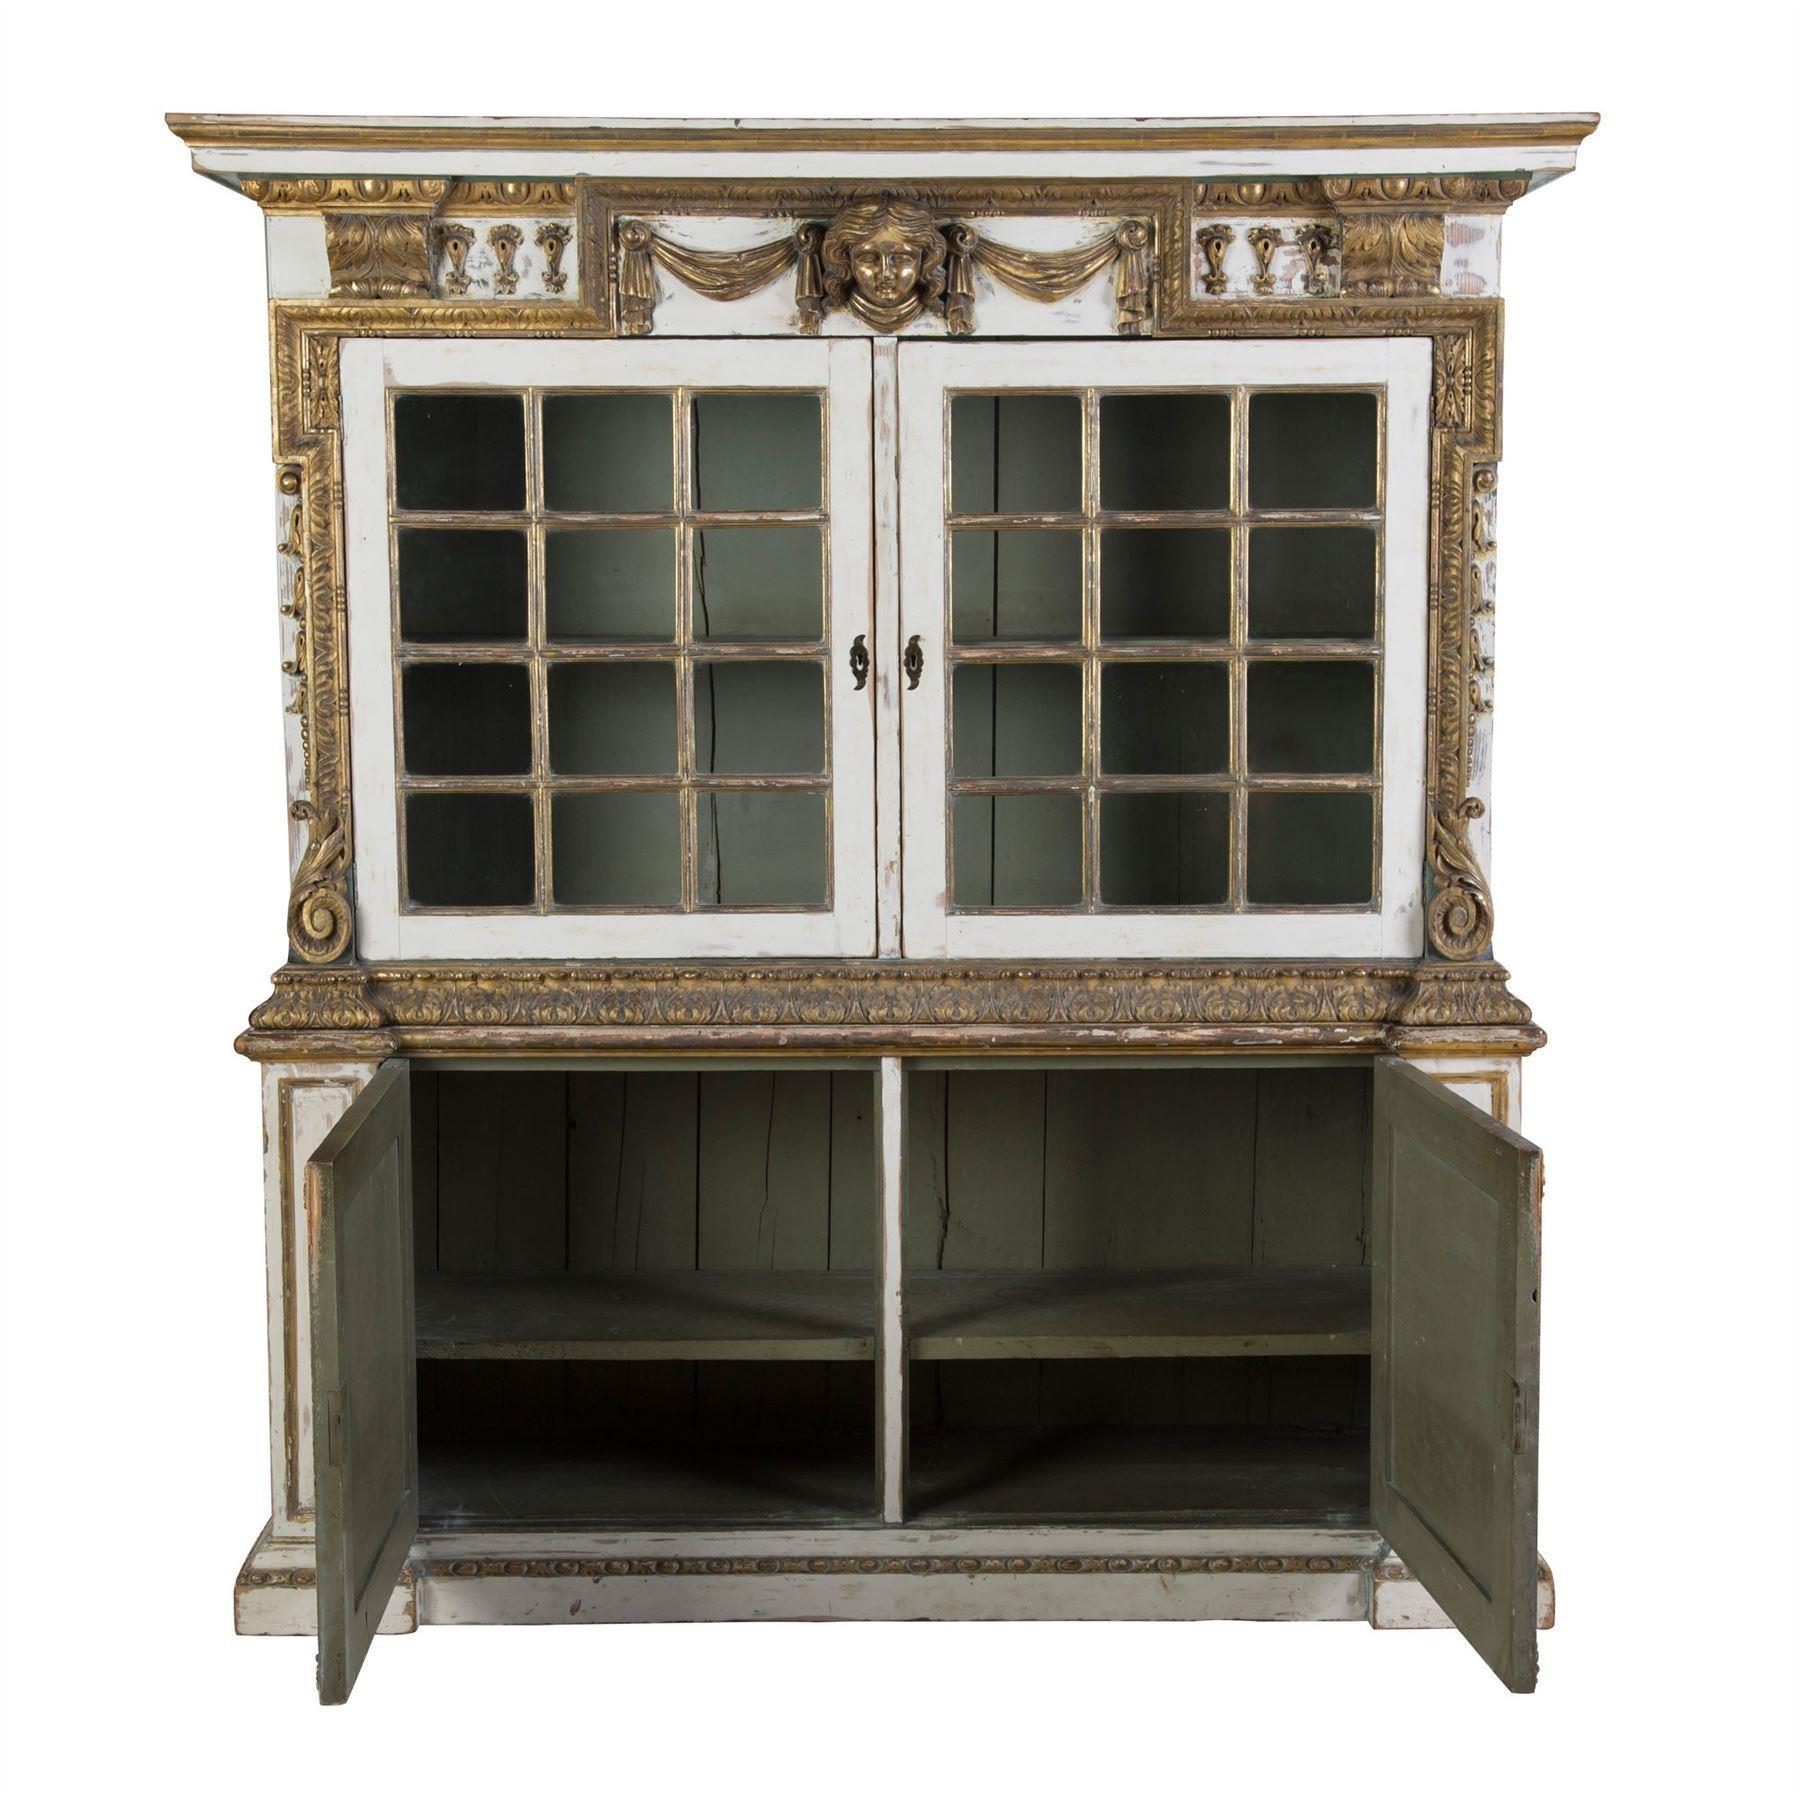 English 19th century Kentian style cupboard with gilded, carved wood details.